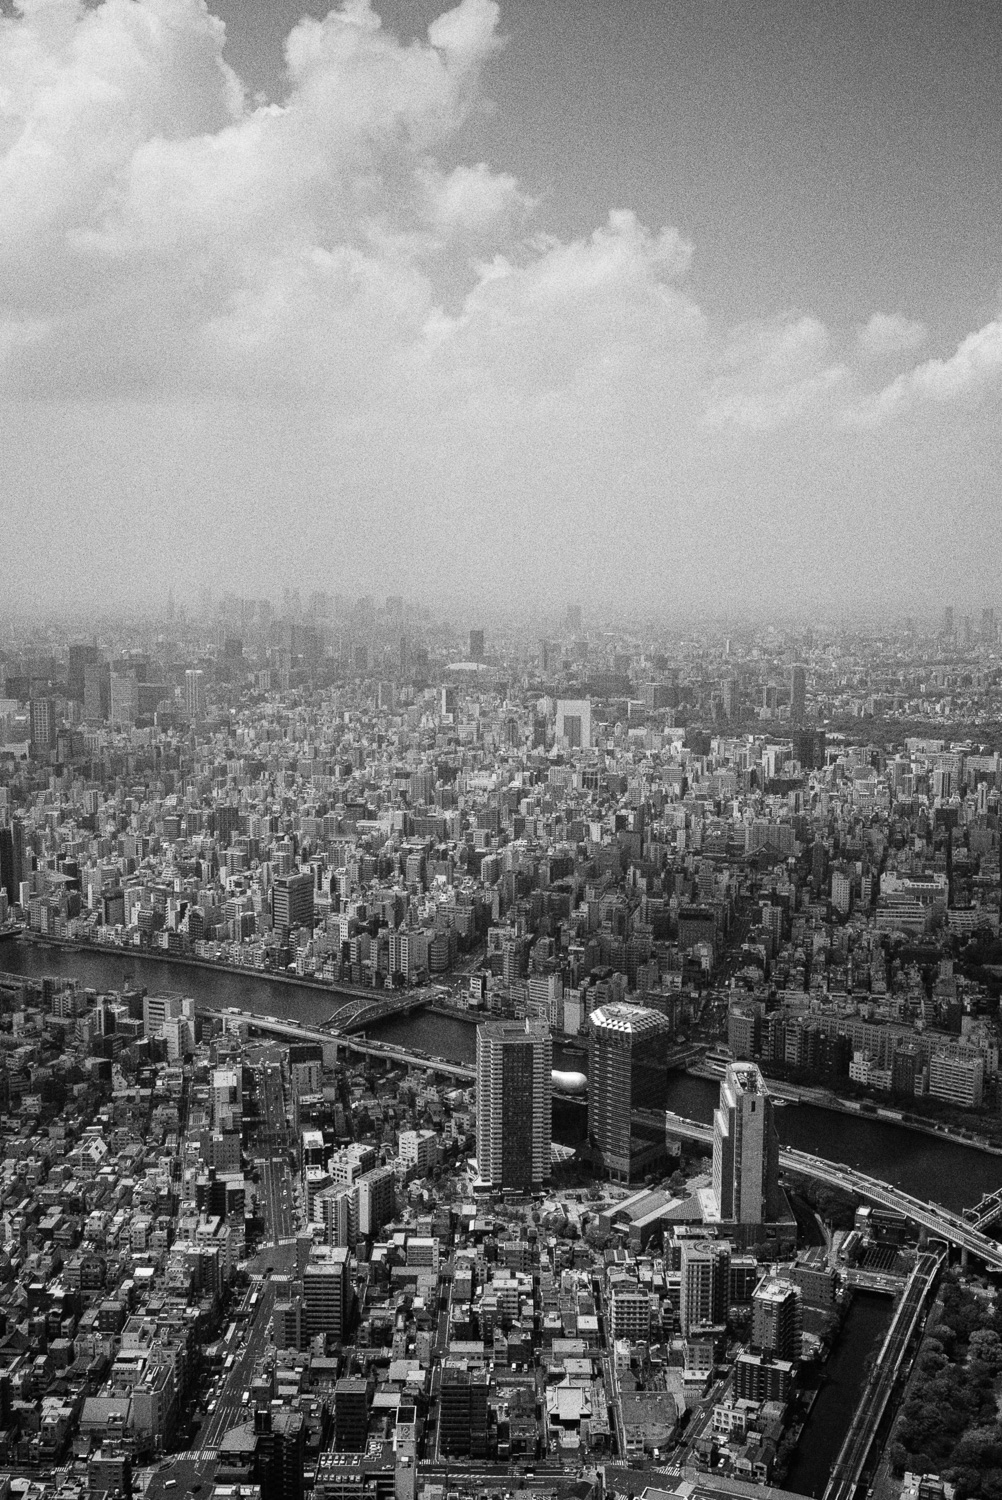  Tokyo is big. Really big. You just won't believe how vastly, hugely, mind-bogglingly big it is. 